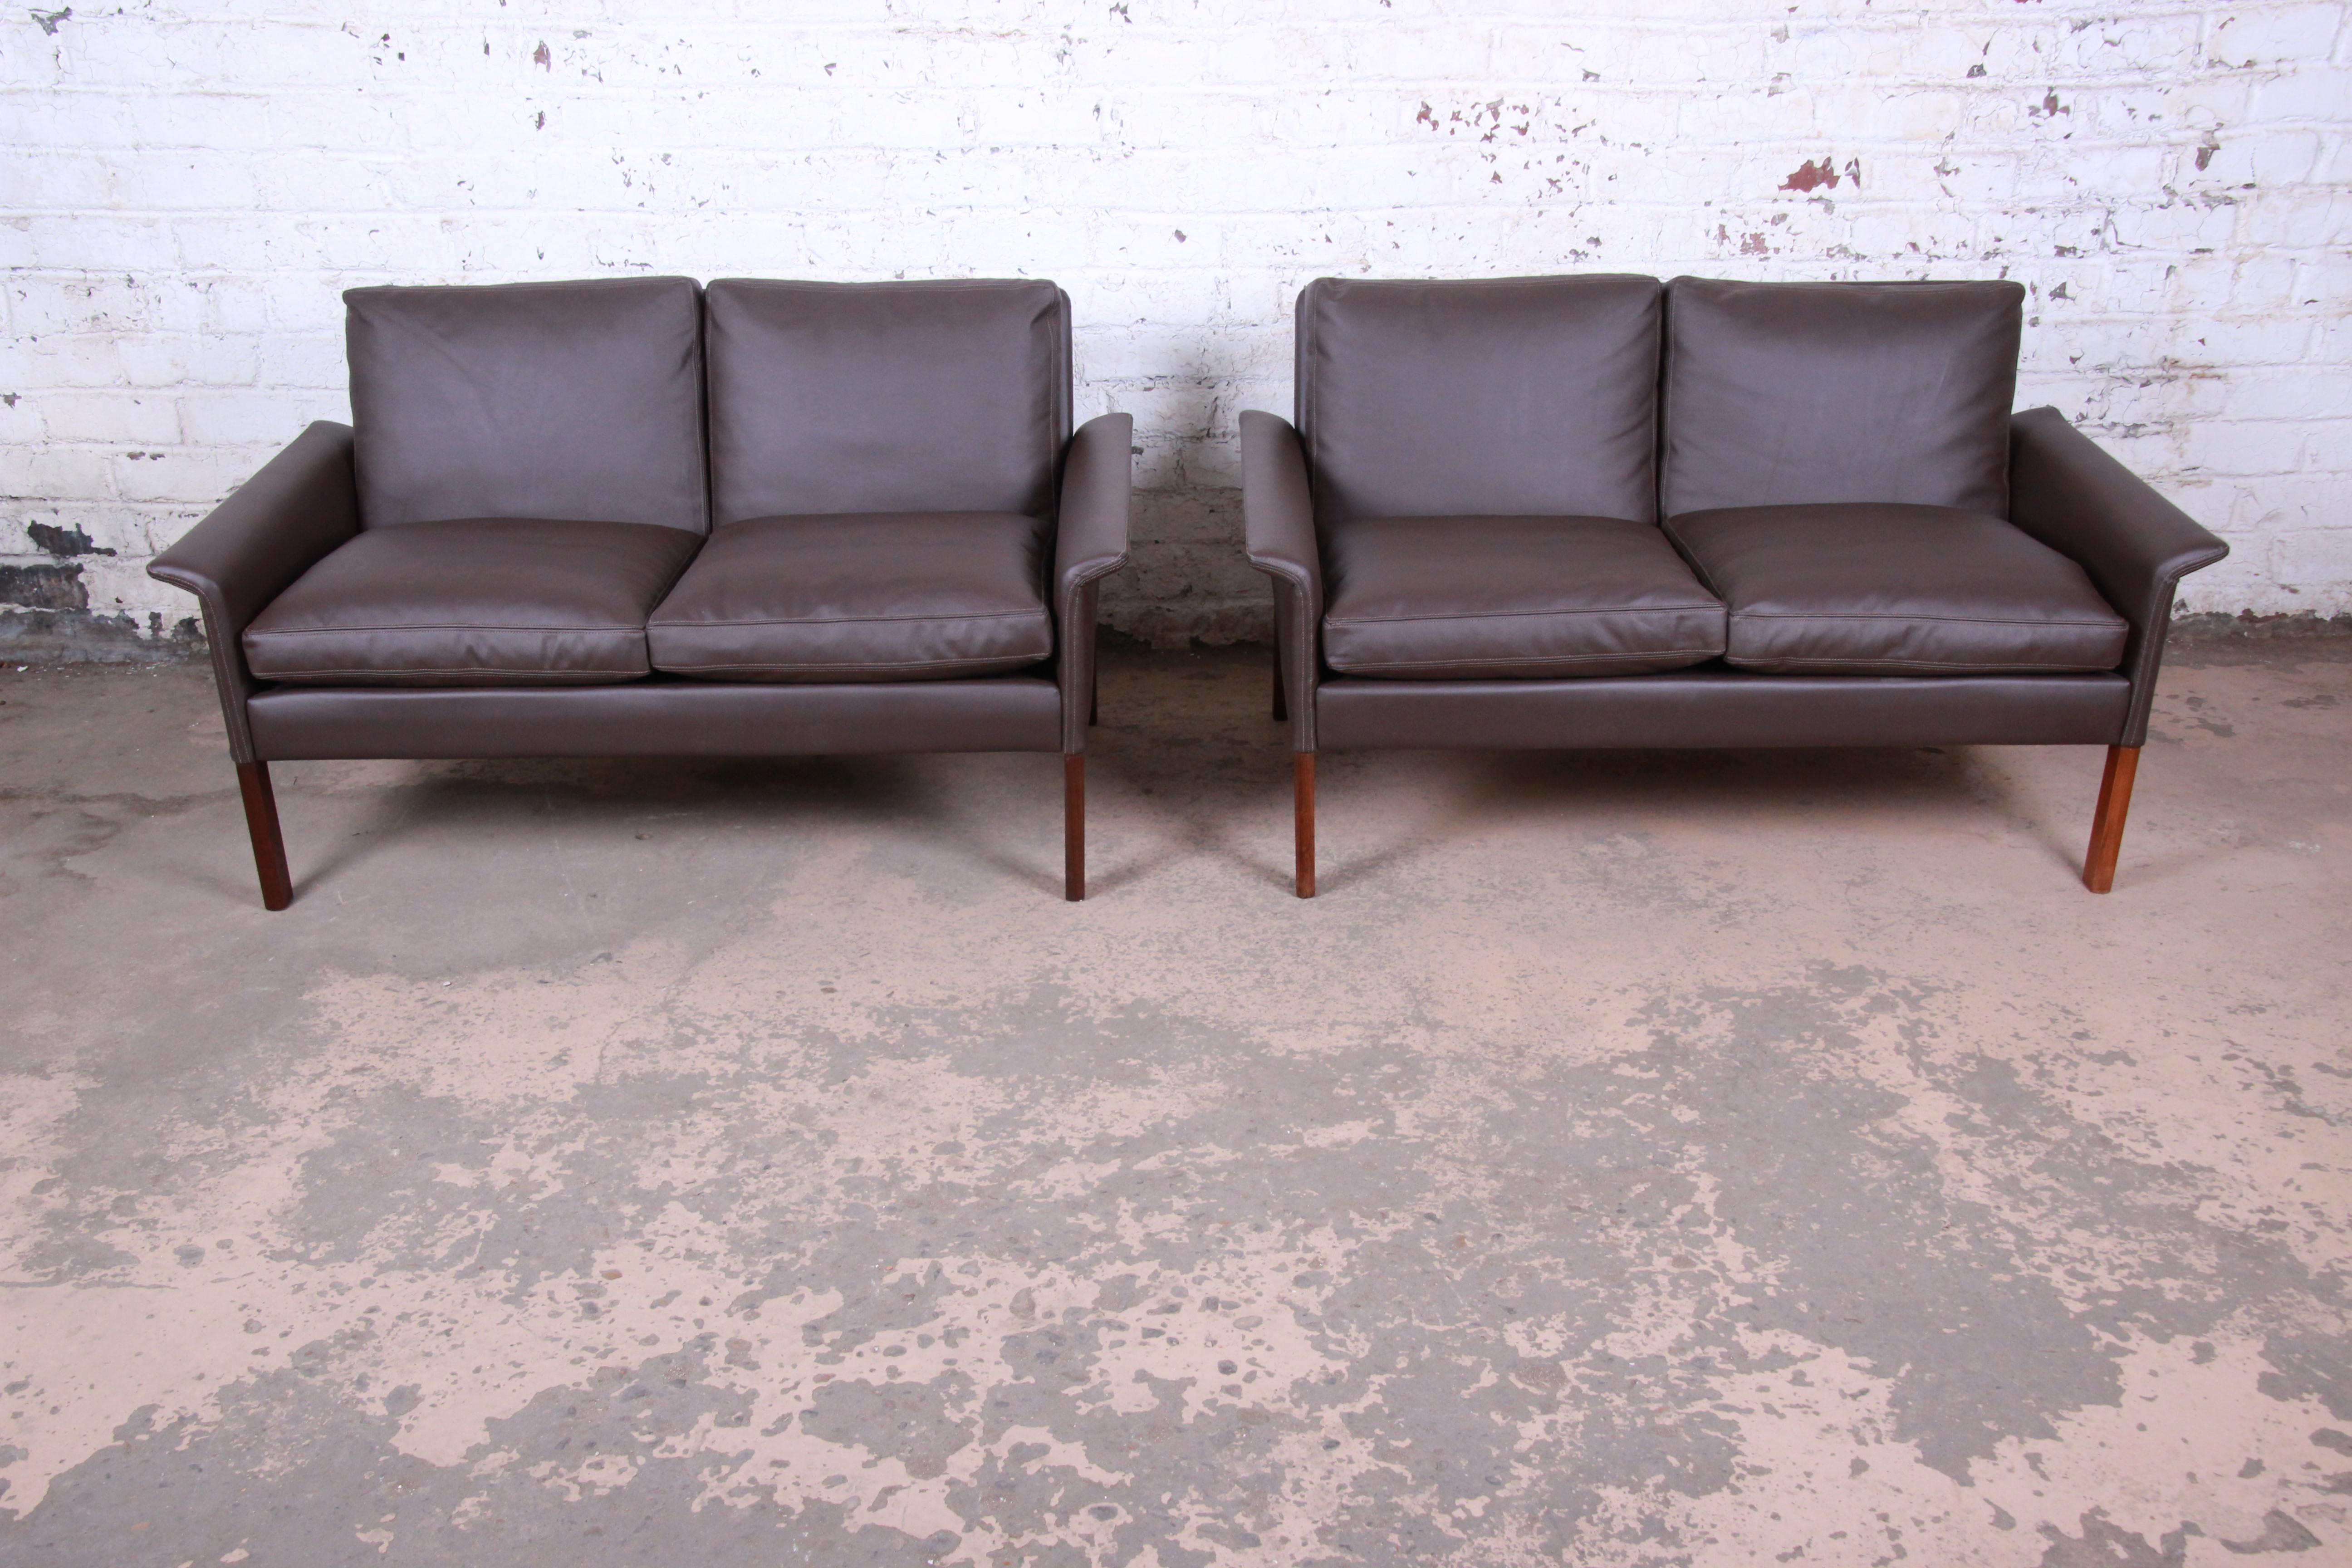 An exceptional pair of midcentury Danish modern settees or loveseats

Designed by Hans Olsen for Christian Sorensen

Denmark, 1960s

Brown leather and rosewood and down-filled cushions

Measures: 51.13